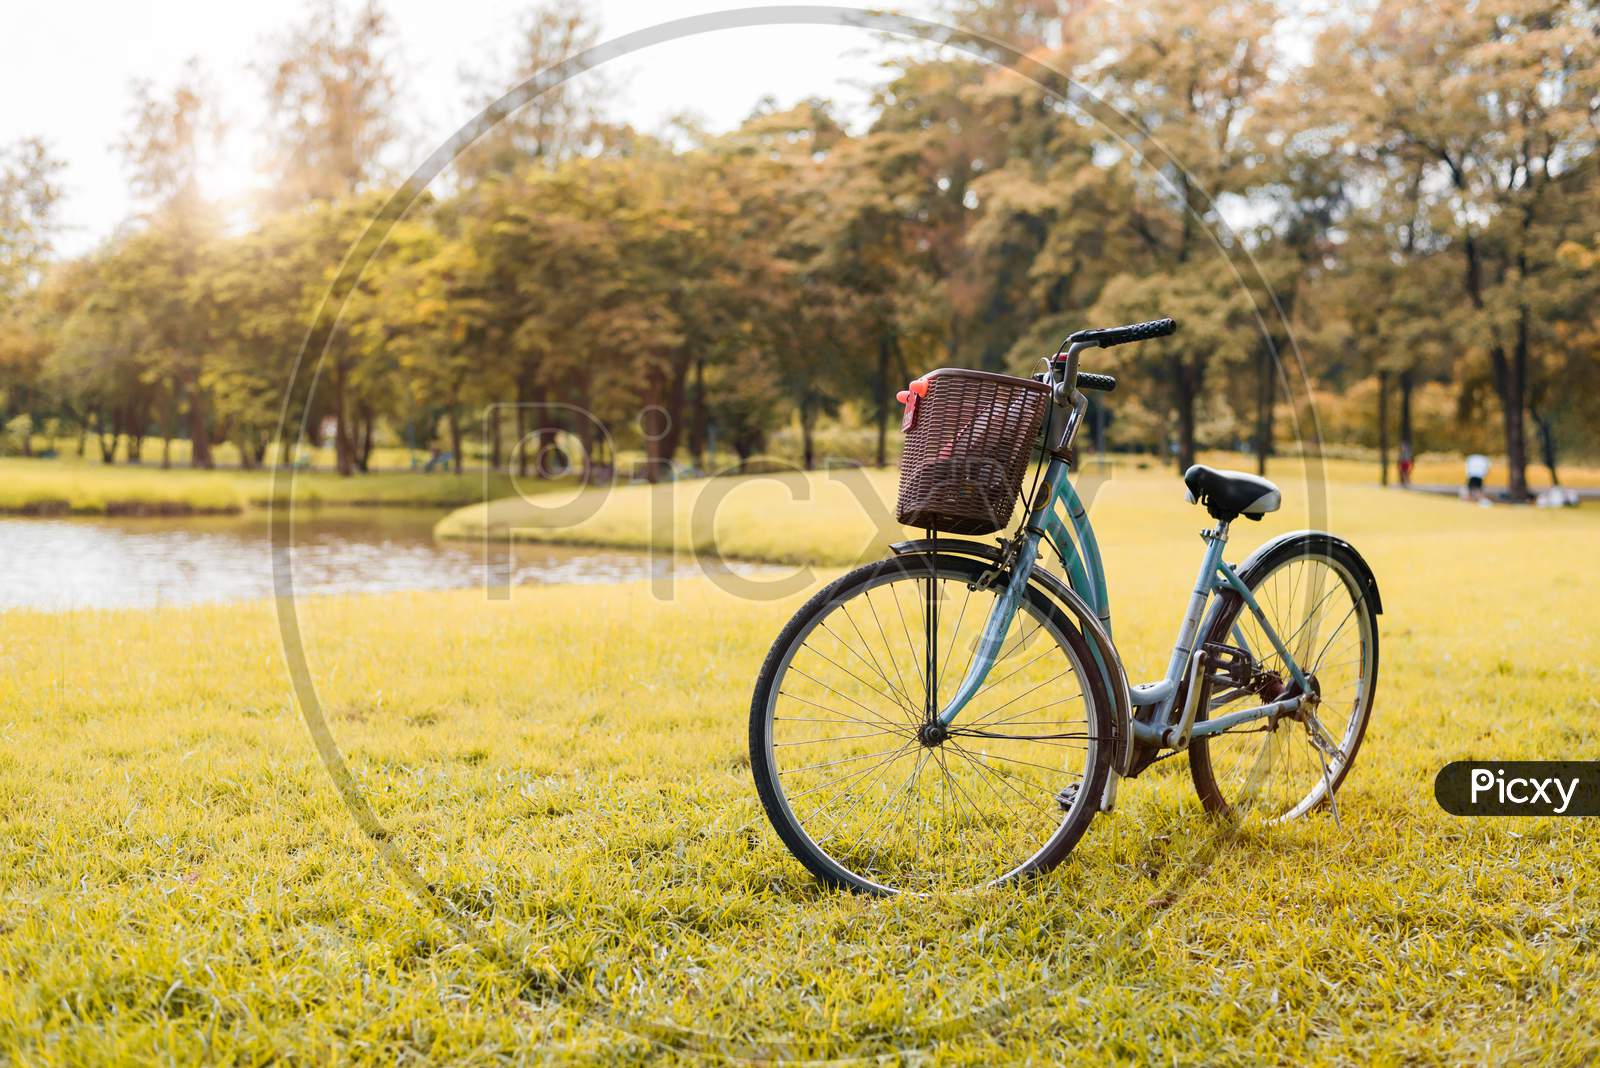 Bicycle In Autumn Park. Sport And Activity Concept. Relax And Activity Concept. Leisure And Nature Theme. Yellow Tone Theme.